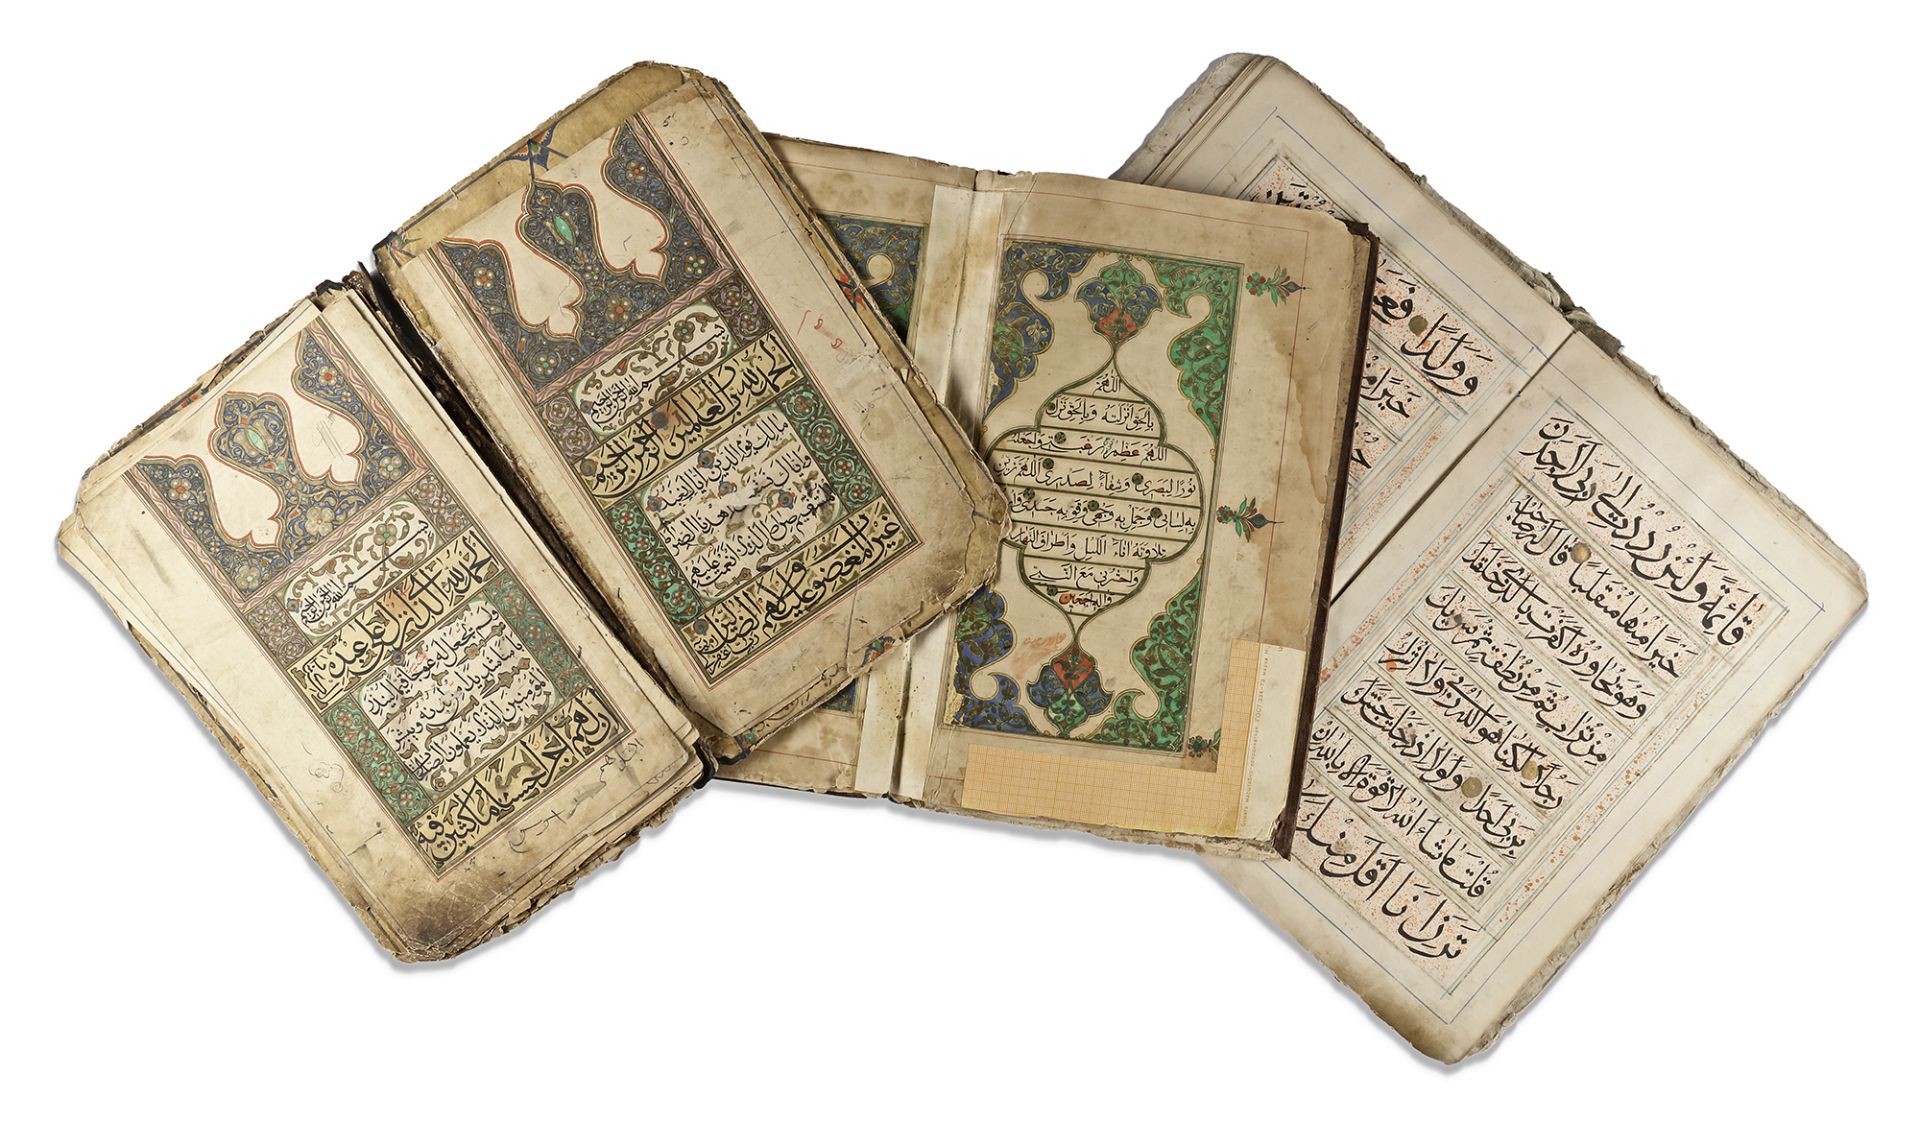 THREE QURAN SECTIONS, CENTRAL ASIA, LATE 19TH CENTURY - Image 8 of 8